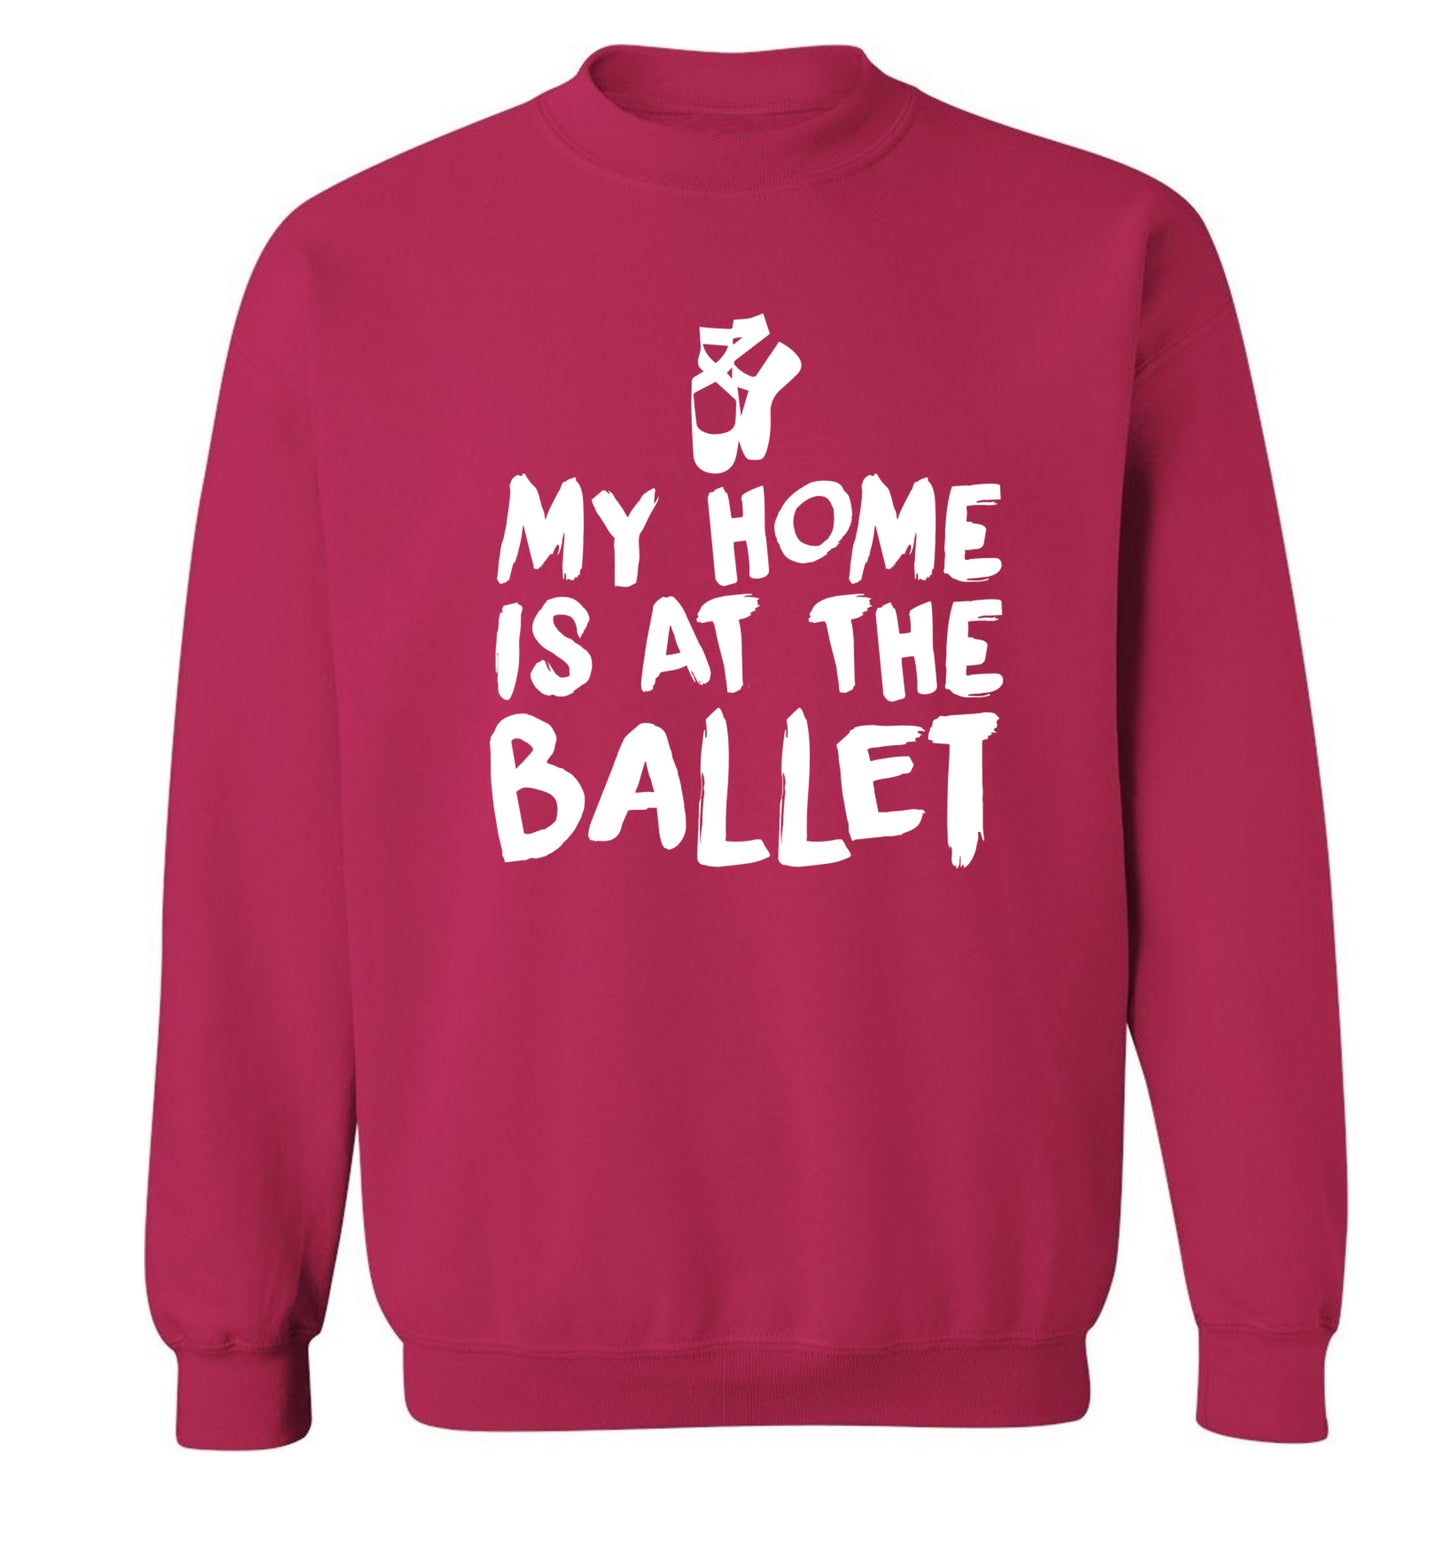 My home is at the ballet Adult's unisex pink Sweater 2XL